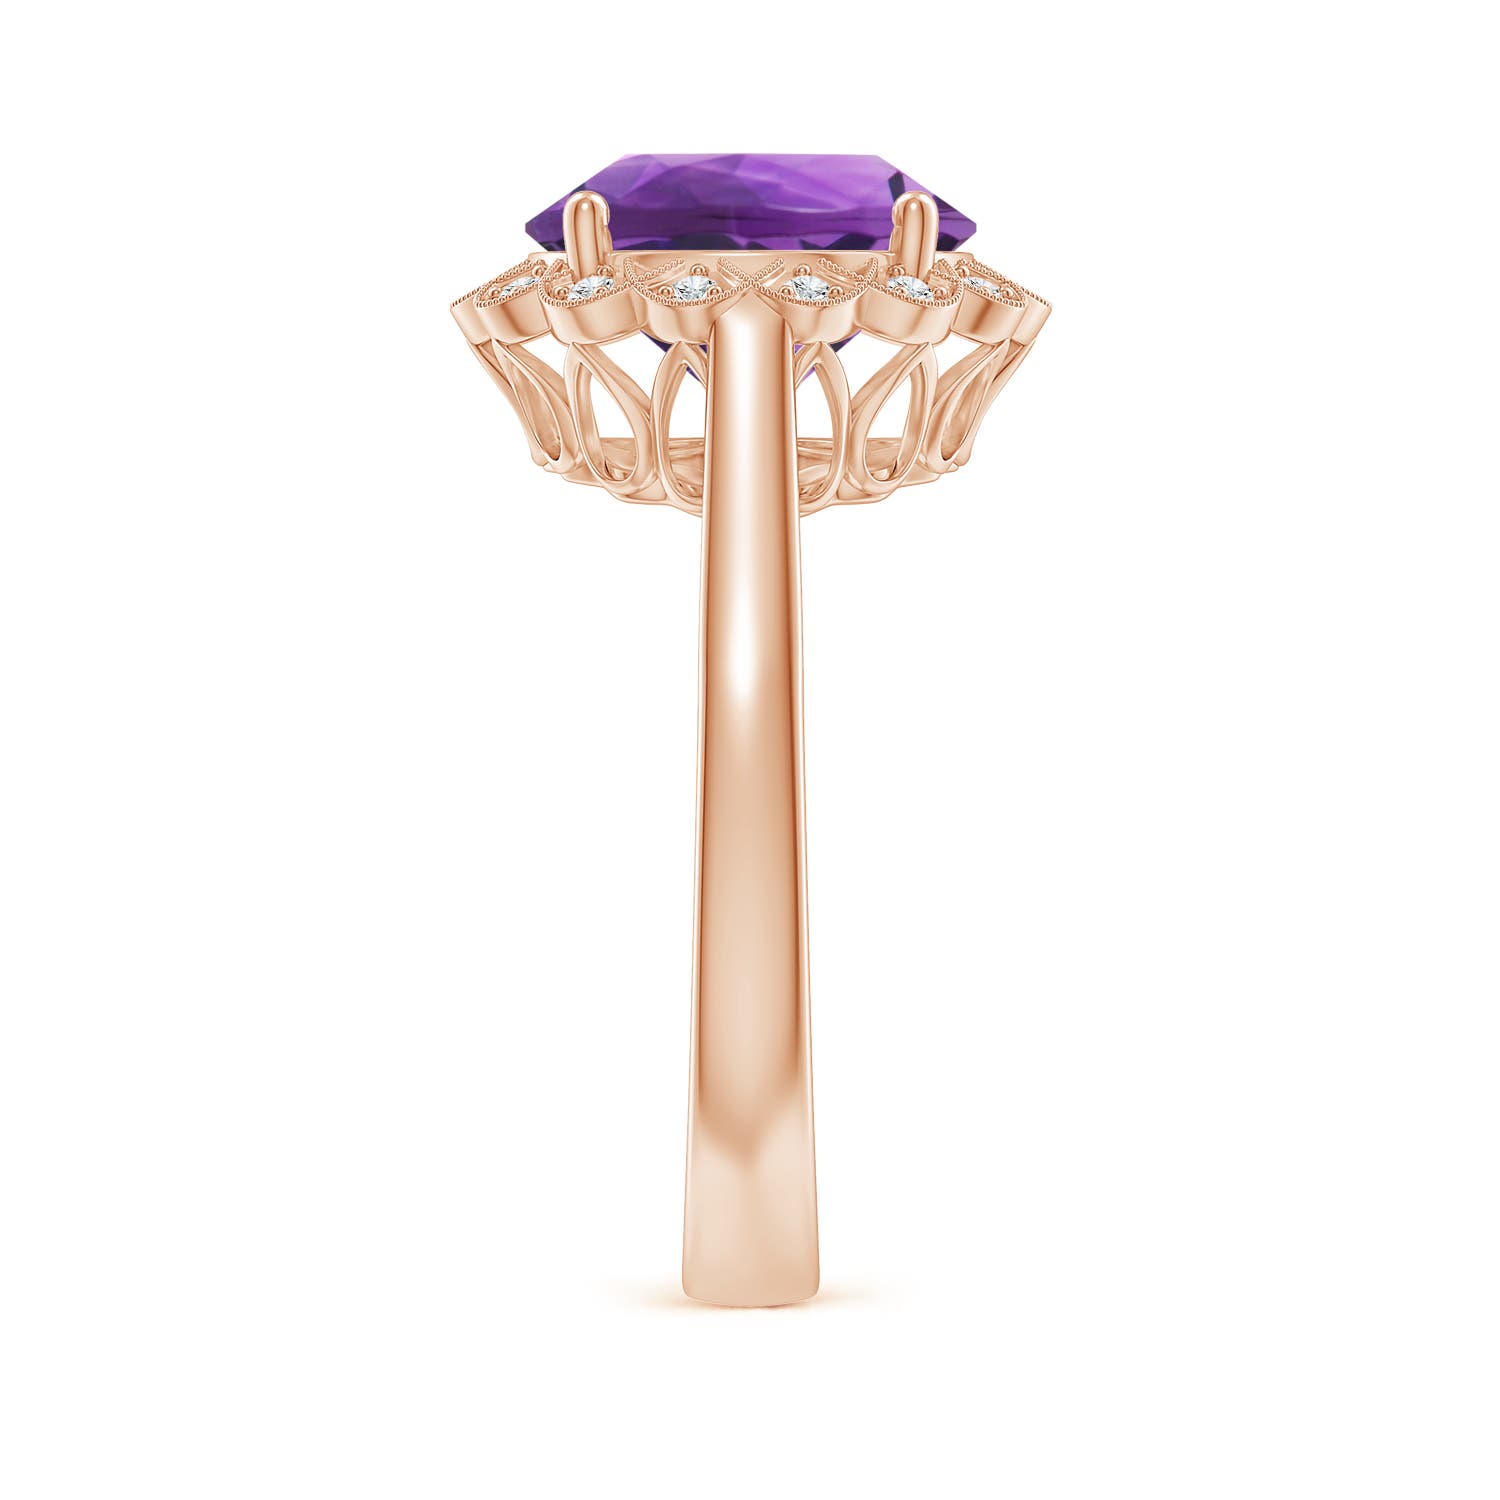 AAA- Amethyst / 3.28 CT / 14 KT Rose Gold